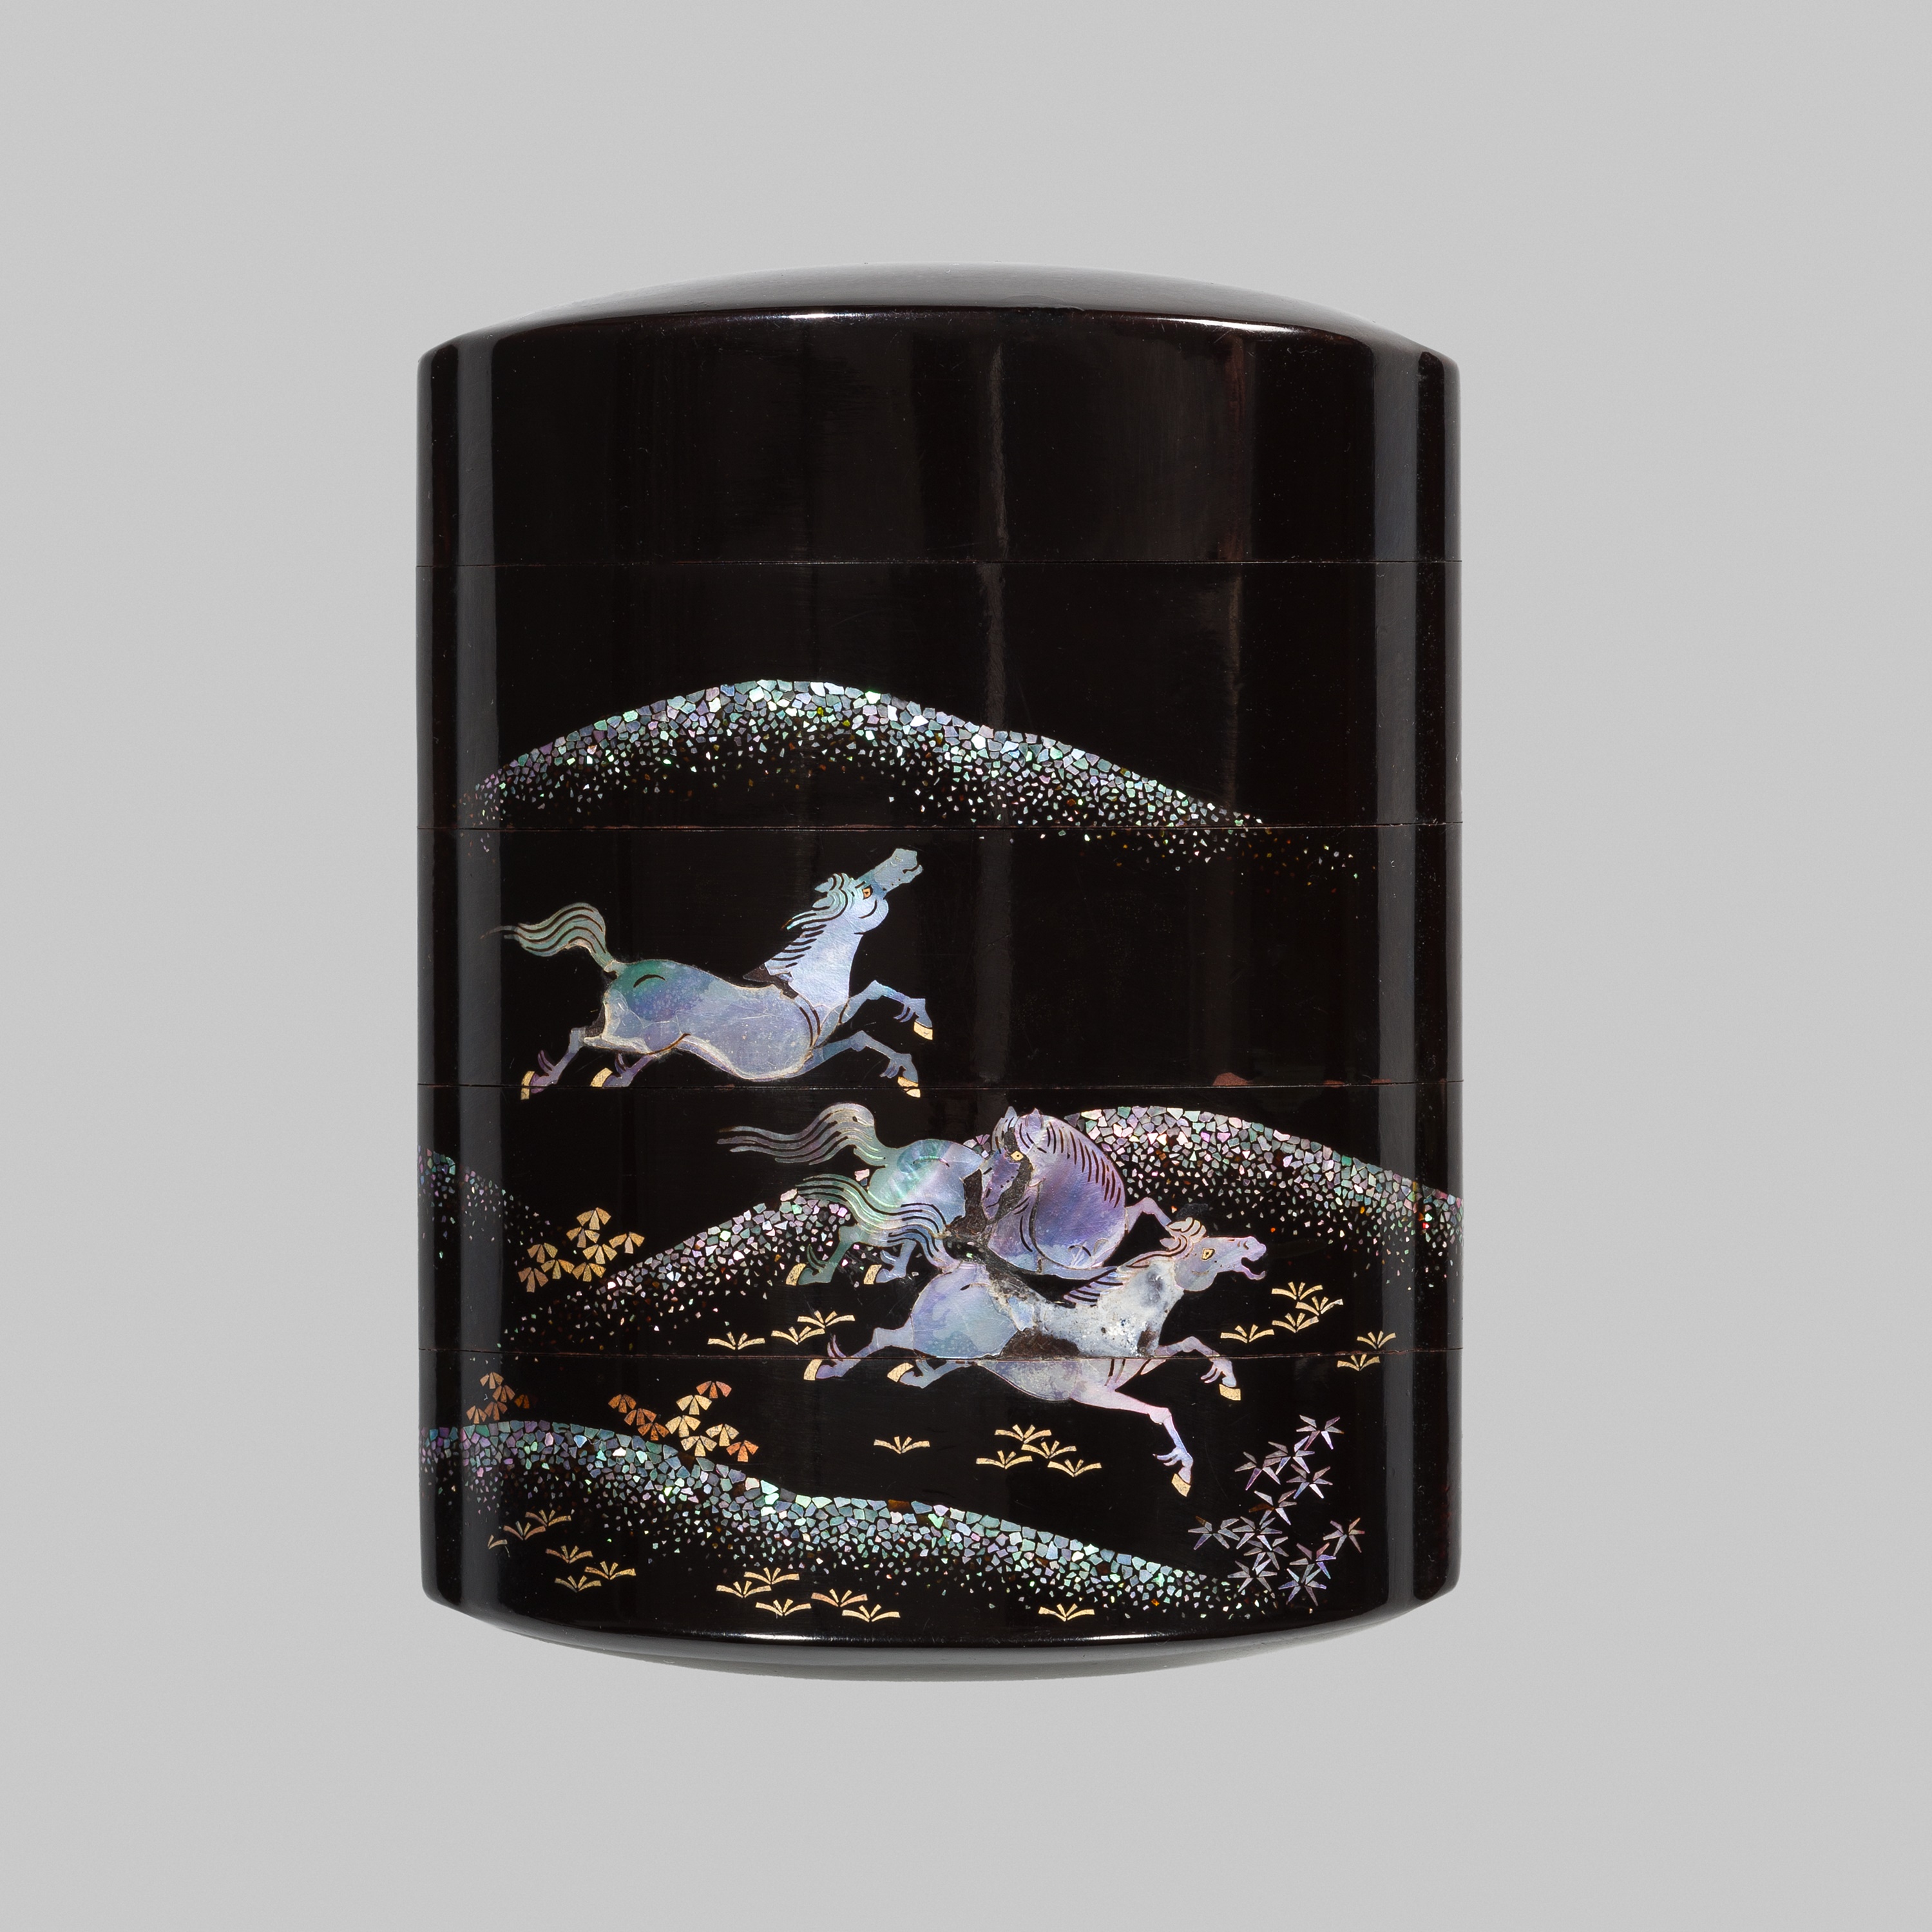 A SOMADA STYLE BLACK LACQUER FOUR-CASE INRO WITH GALLOPING HORSES